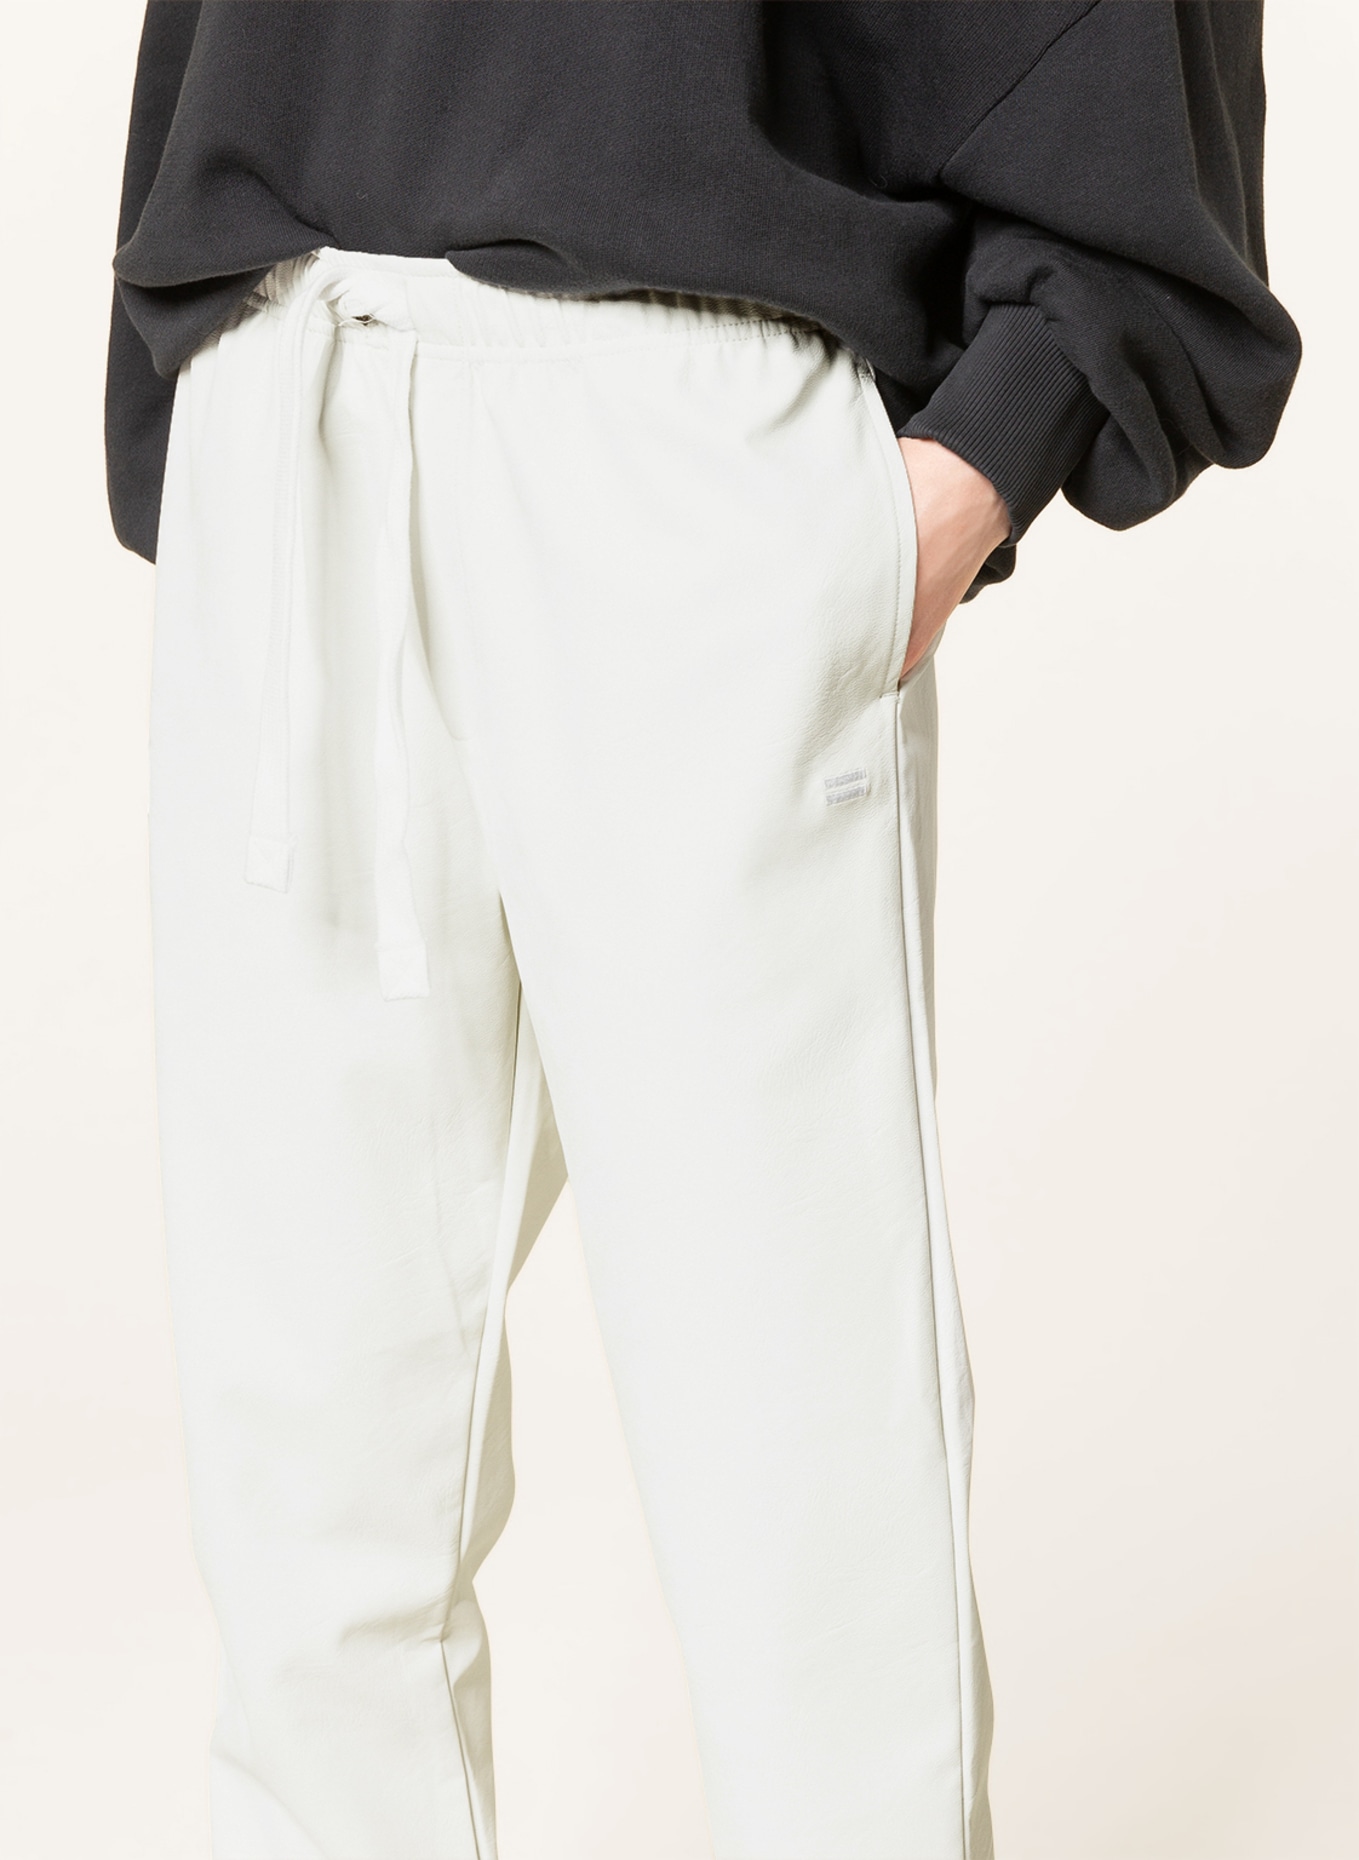 10DAYS Pants in leather look, Color: WHITE (Image 5)